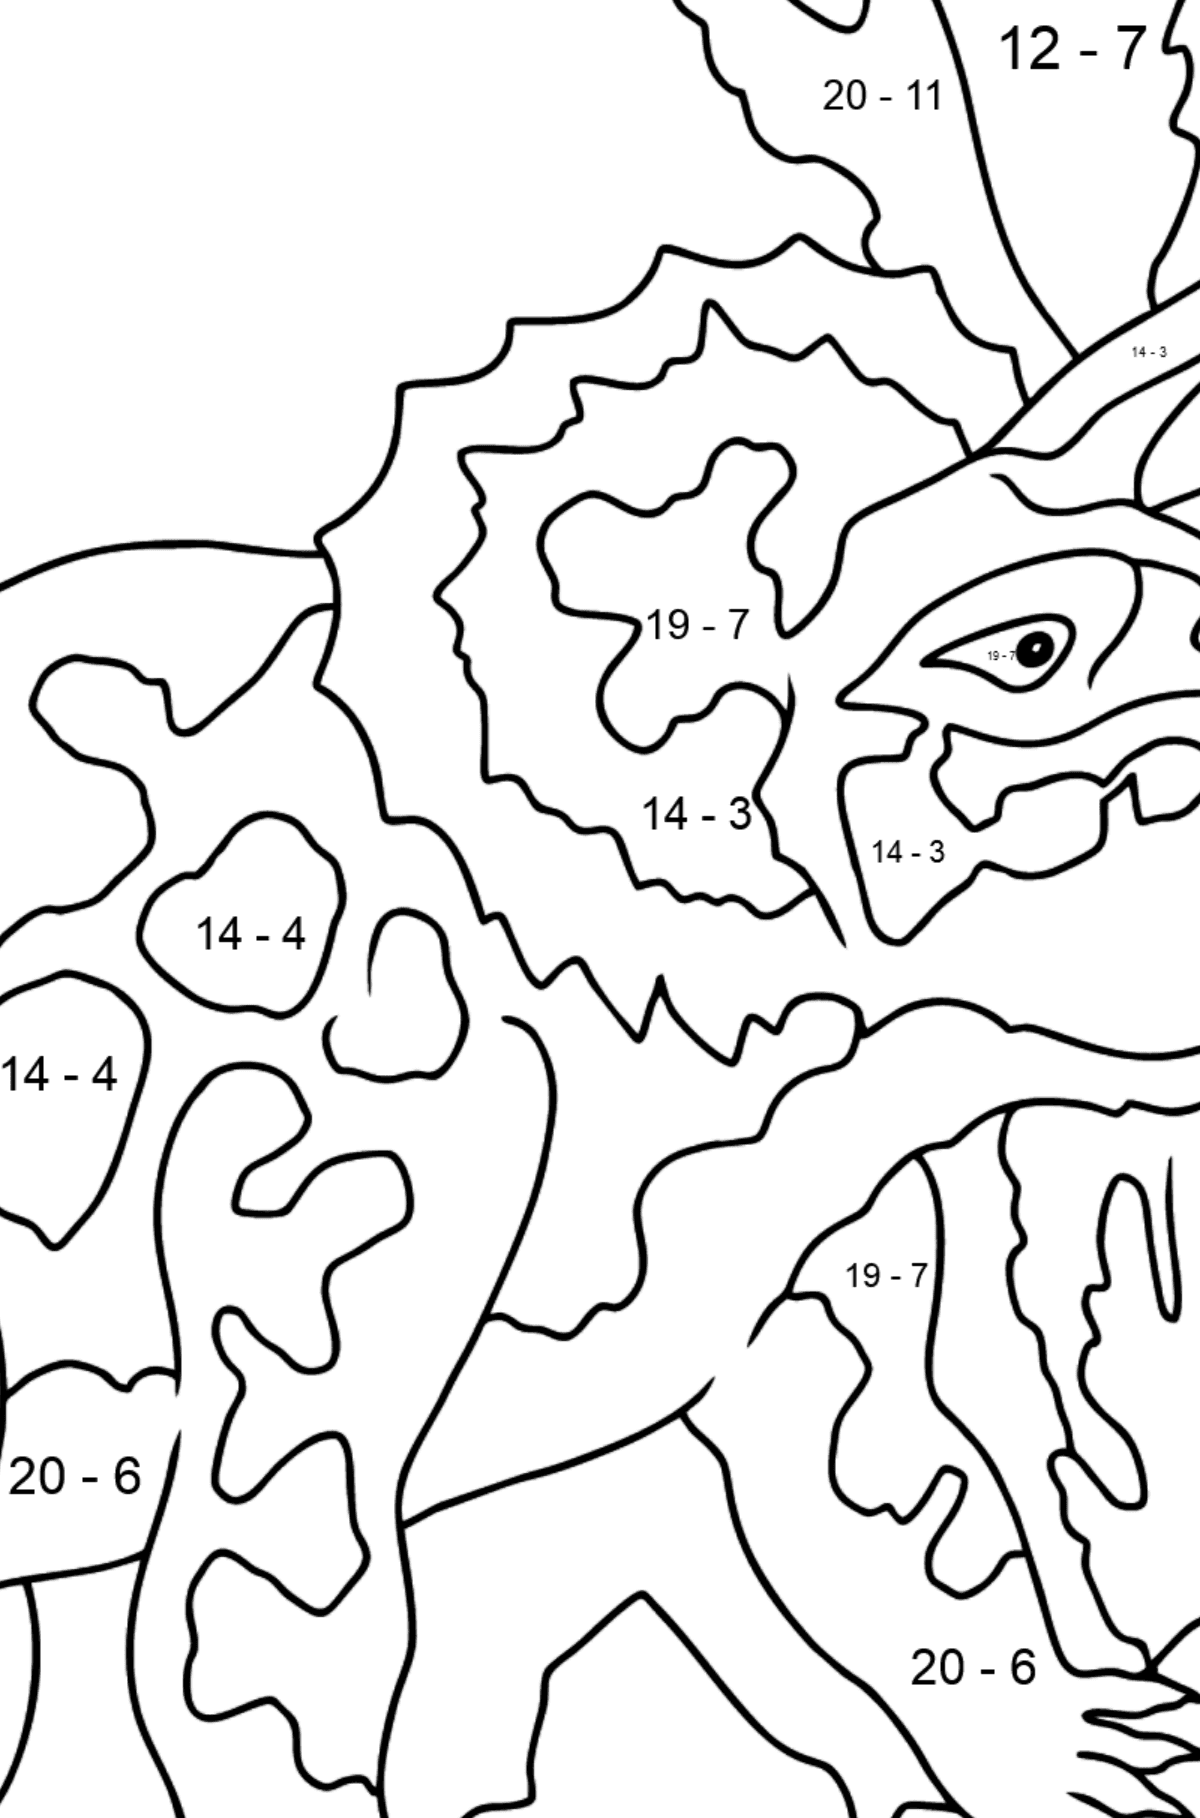 Coloring Page - Triceratops - A Peaceful Horned Dinosaur - Math Coloring - Subtraction for Kids